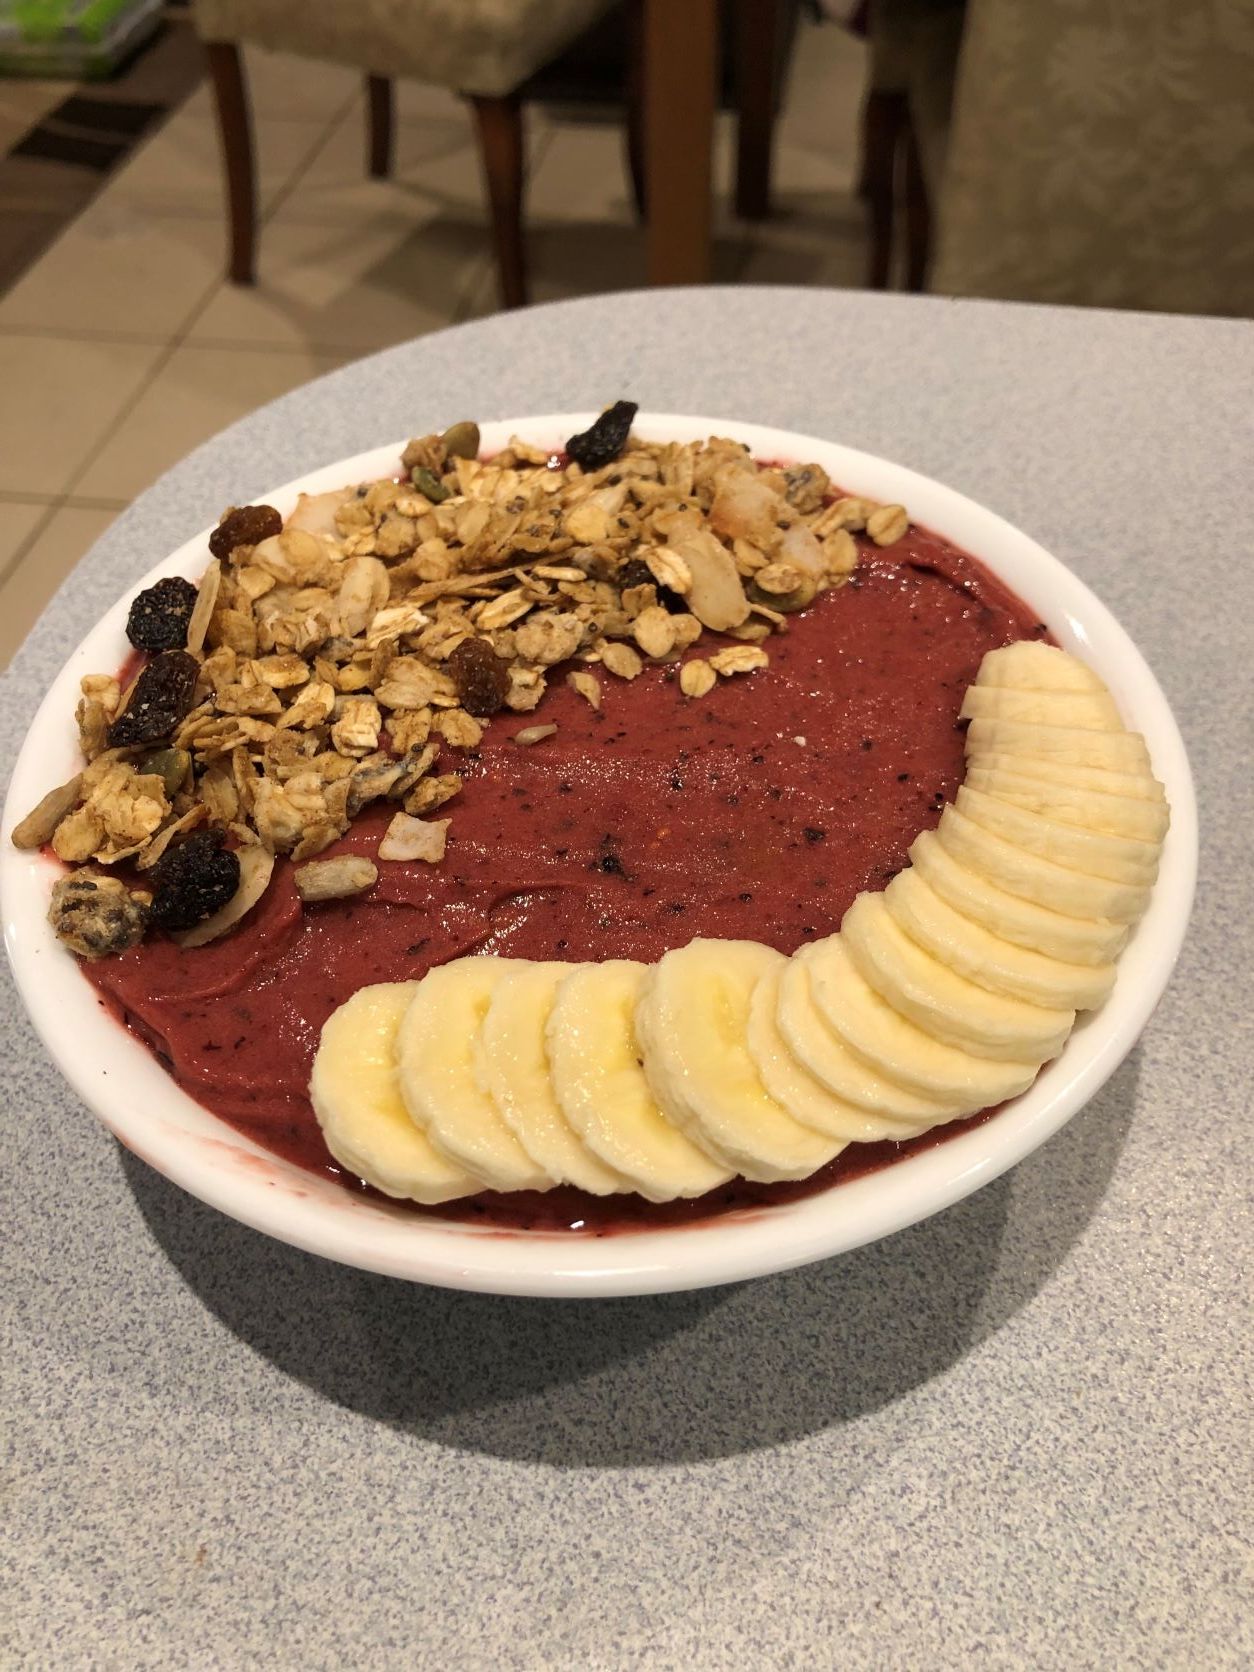 Name: Aimee. Shortlist. Smoothie Bowl. Bananas are a healthy source of fiber, potassium, vitamin B6 and vitamin C. Frozen berries are rich in antioxidants, vitamins C, A, and the phytonutrients available in berries can help protect cells against damage from disease-linked free radicals. Granola provides protein and nutrients like iron, vitamin D, folate, and zinc. A good serving varys from 1/4 cup to a full cup depending on what is in it. Granola can also be an excellent source of Vitamins B, C, E, Phosphoru, Potassium and Calcium. A Smoothie bowl is a quick, easy and healthy snack.